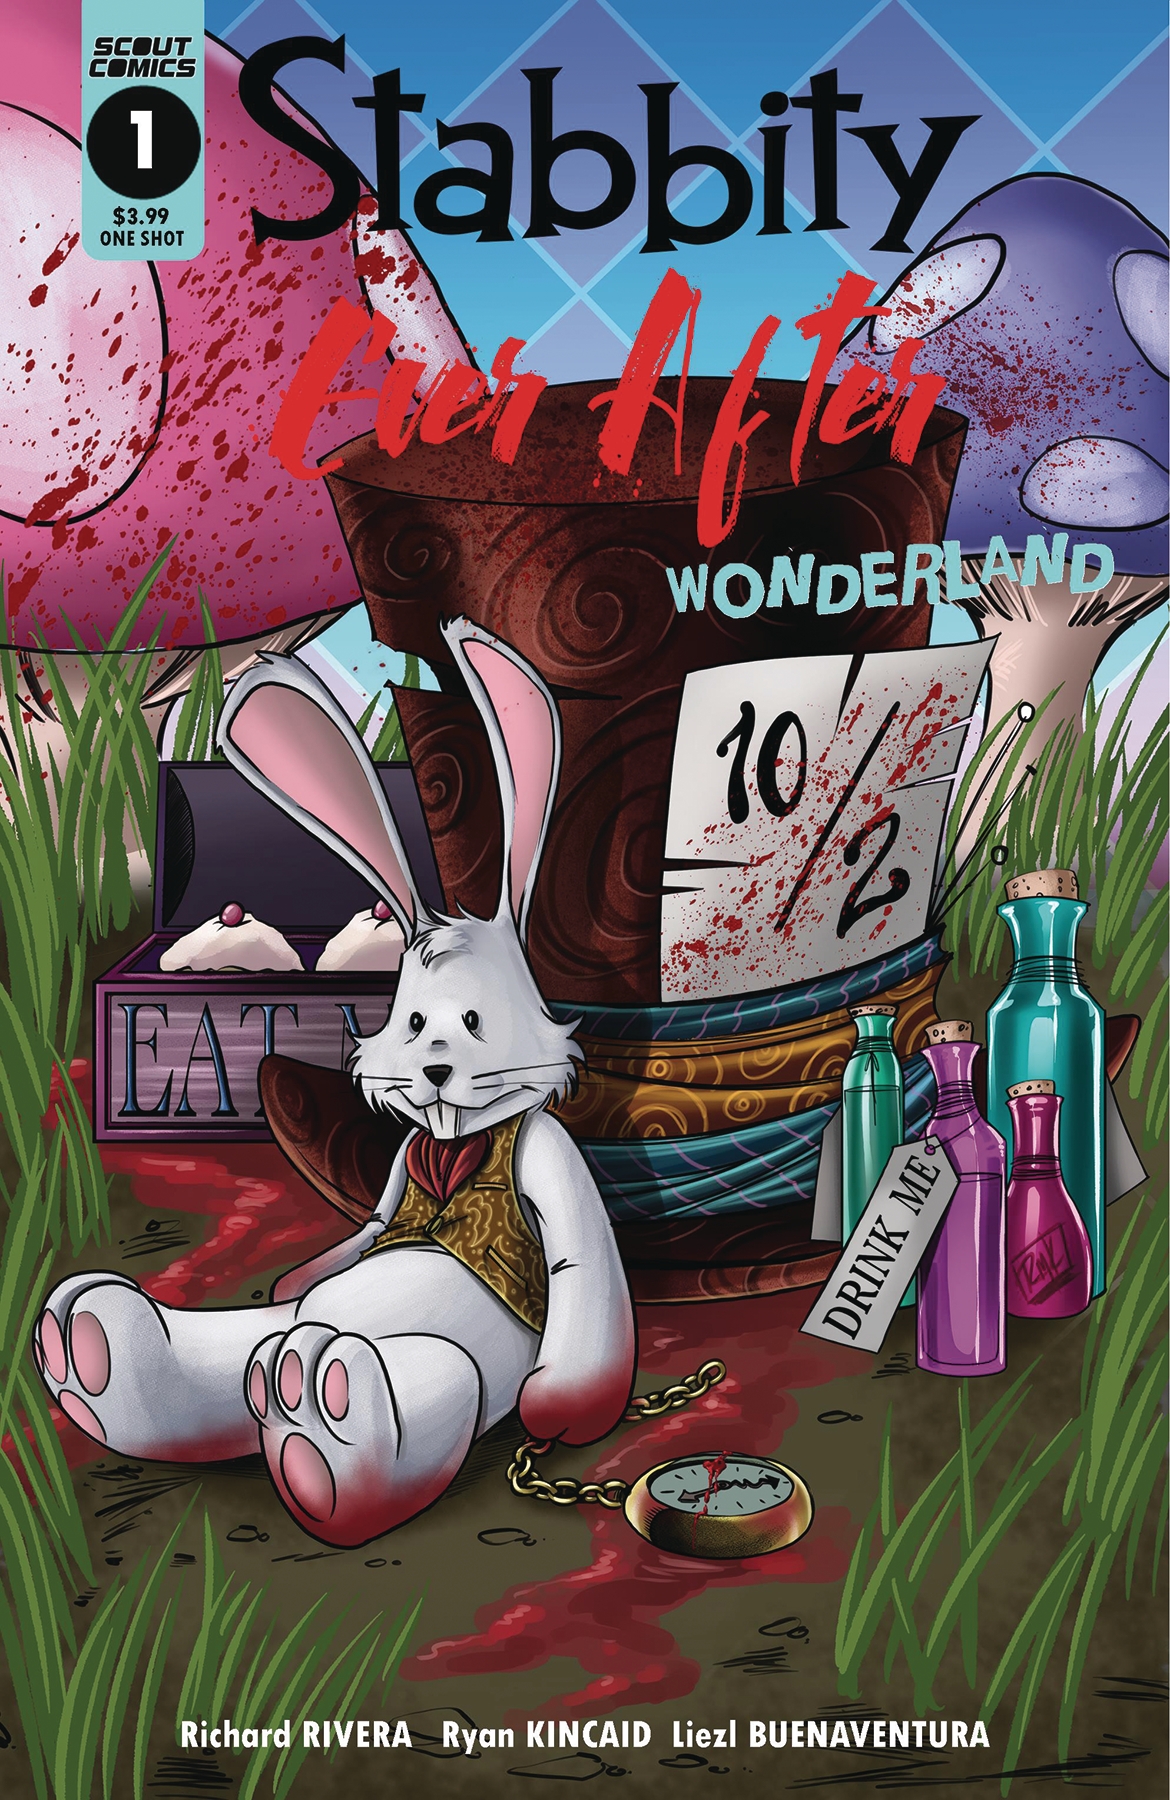 NOW IN PREVIEWS THE WORLDS FAVORITE STABBITY BUNNY